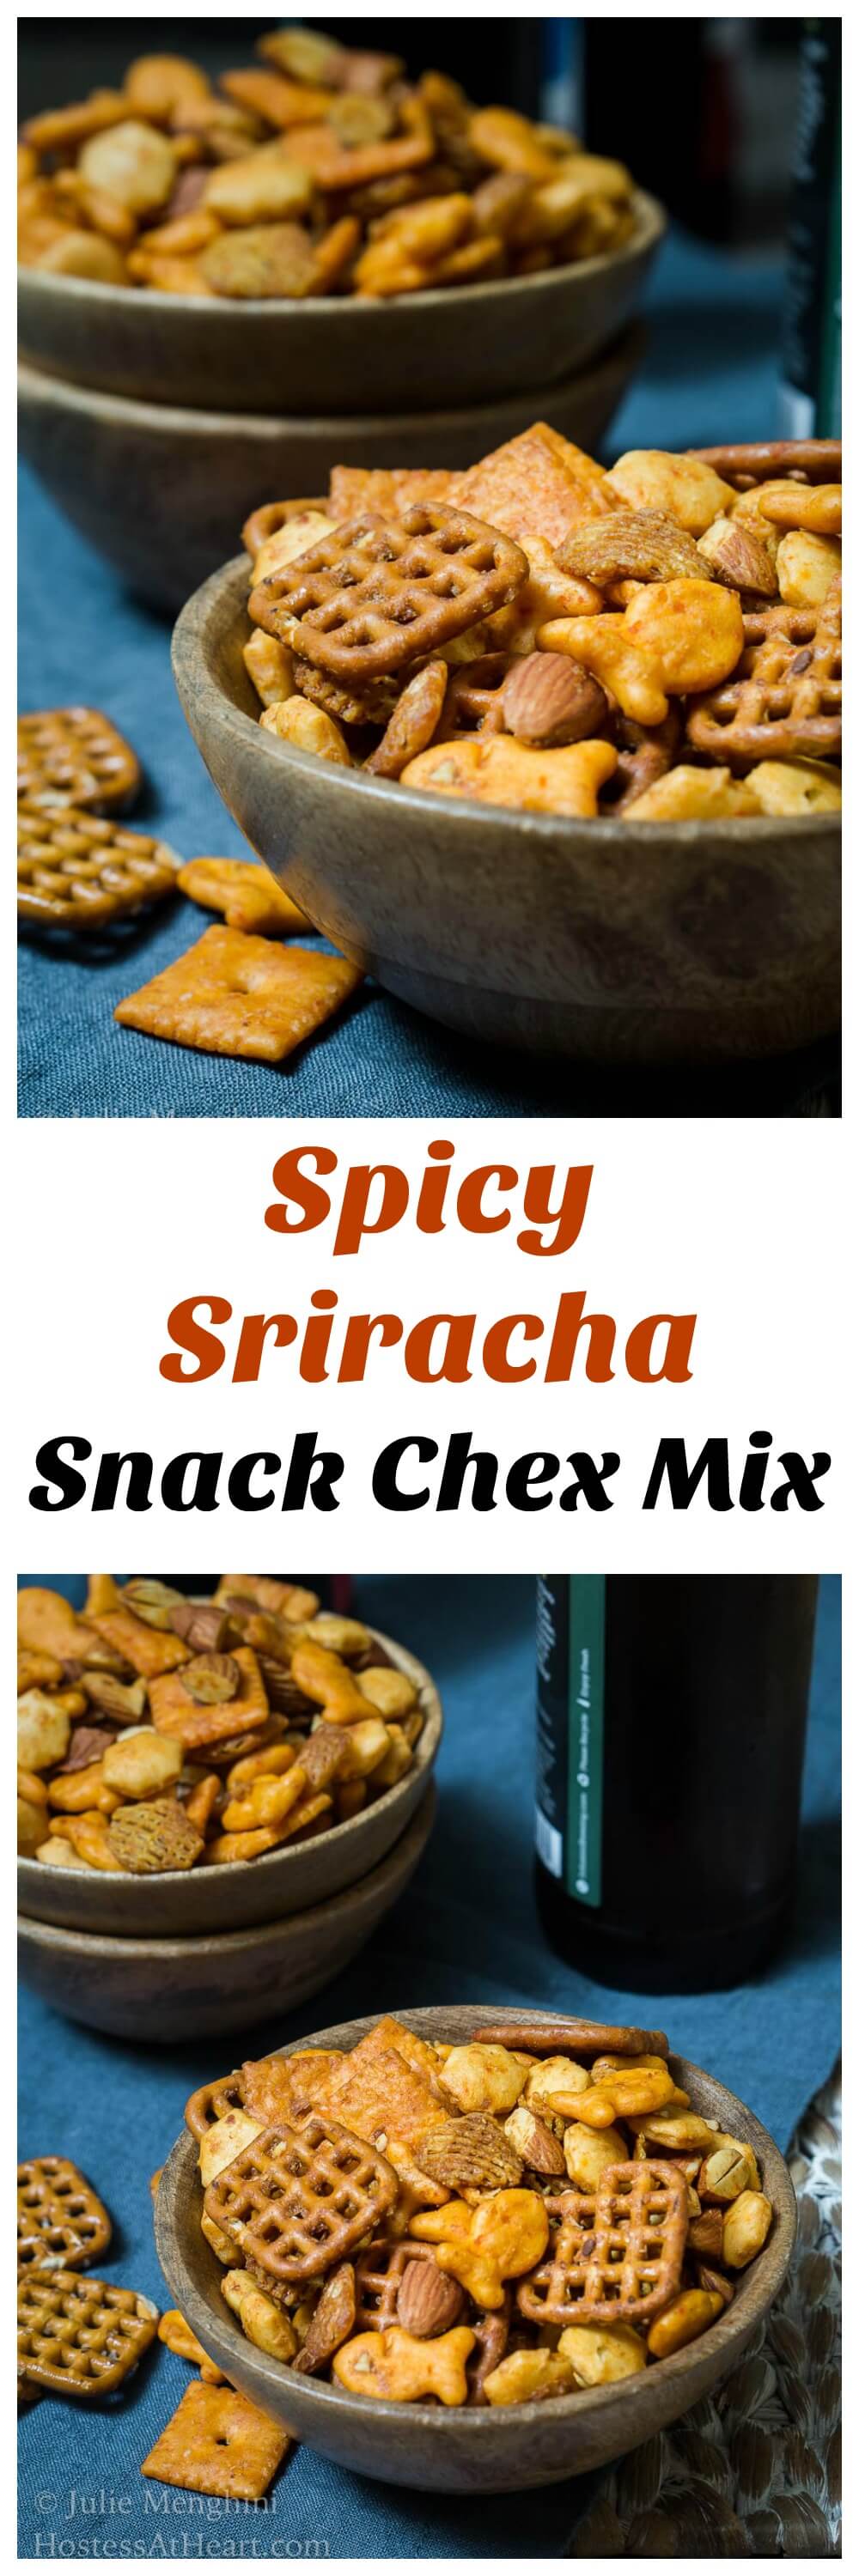 Spicy Sriracha Snack Chex Mix (For The Big Game) - Hostess At Heart